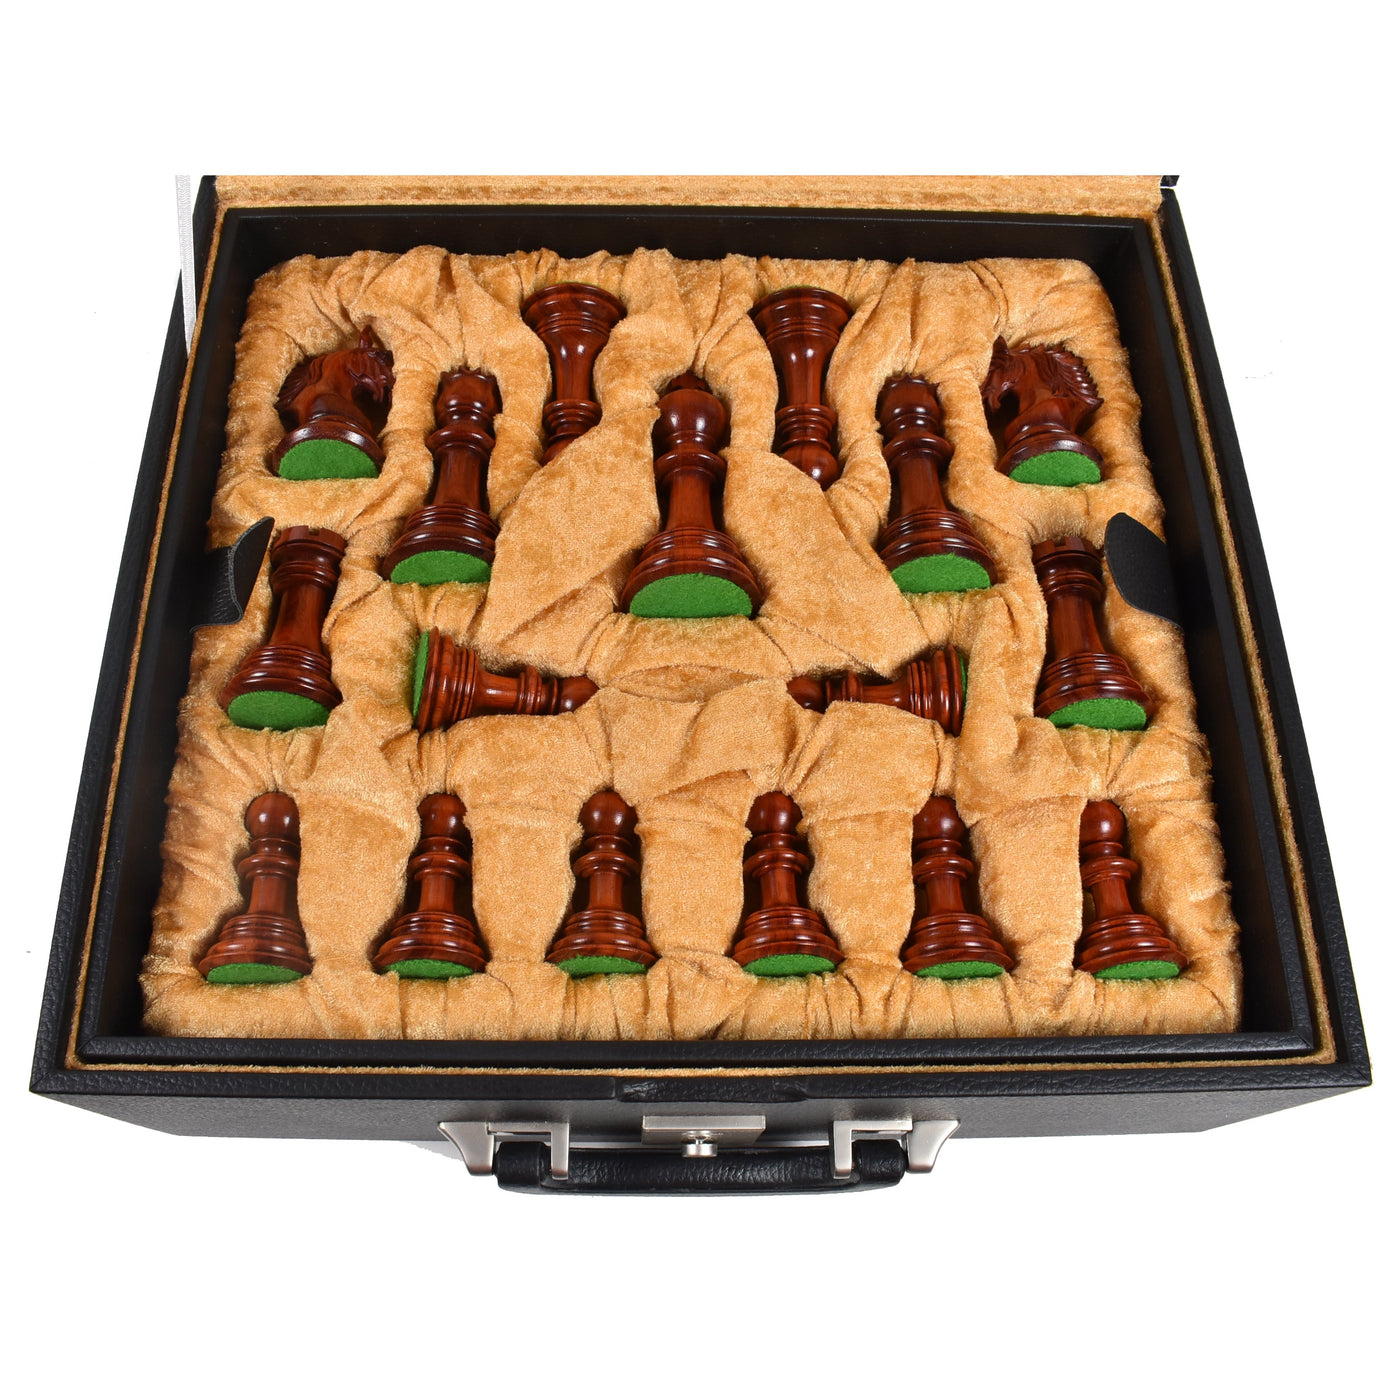 4.1″ Stallion Staunton Luxury Bud Rose Wood Chess Pieces with 23" Bud Rosewood & Maple Wood Signature Wooden Chessboard and Leatherette Coffer Storage Box